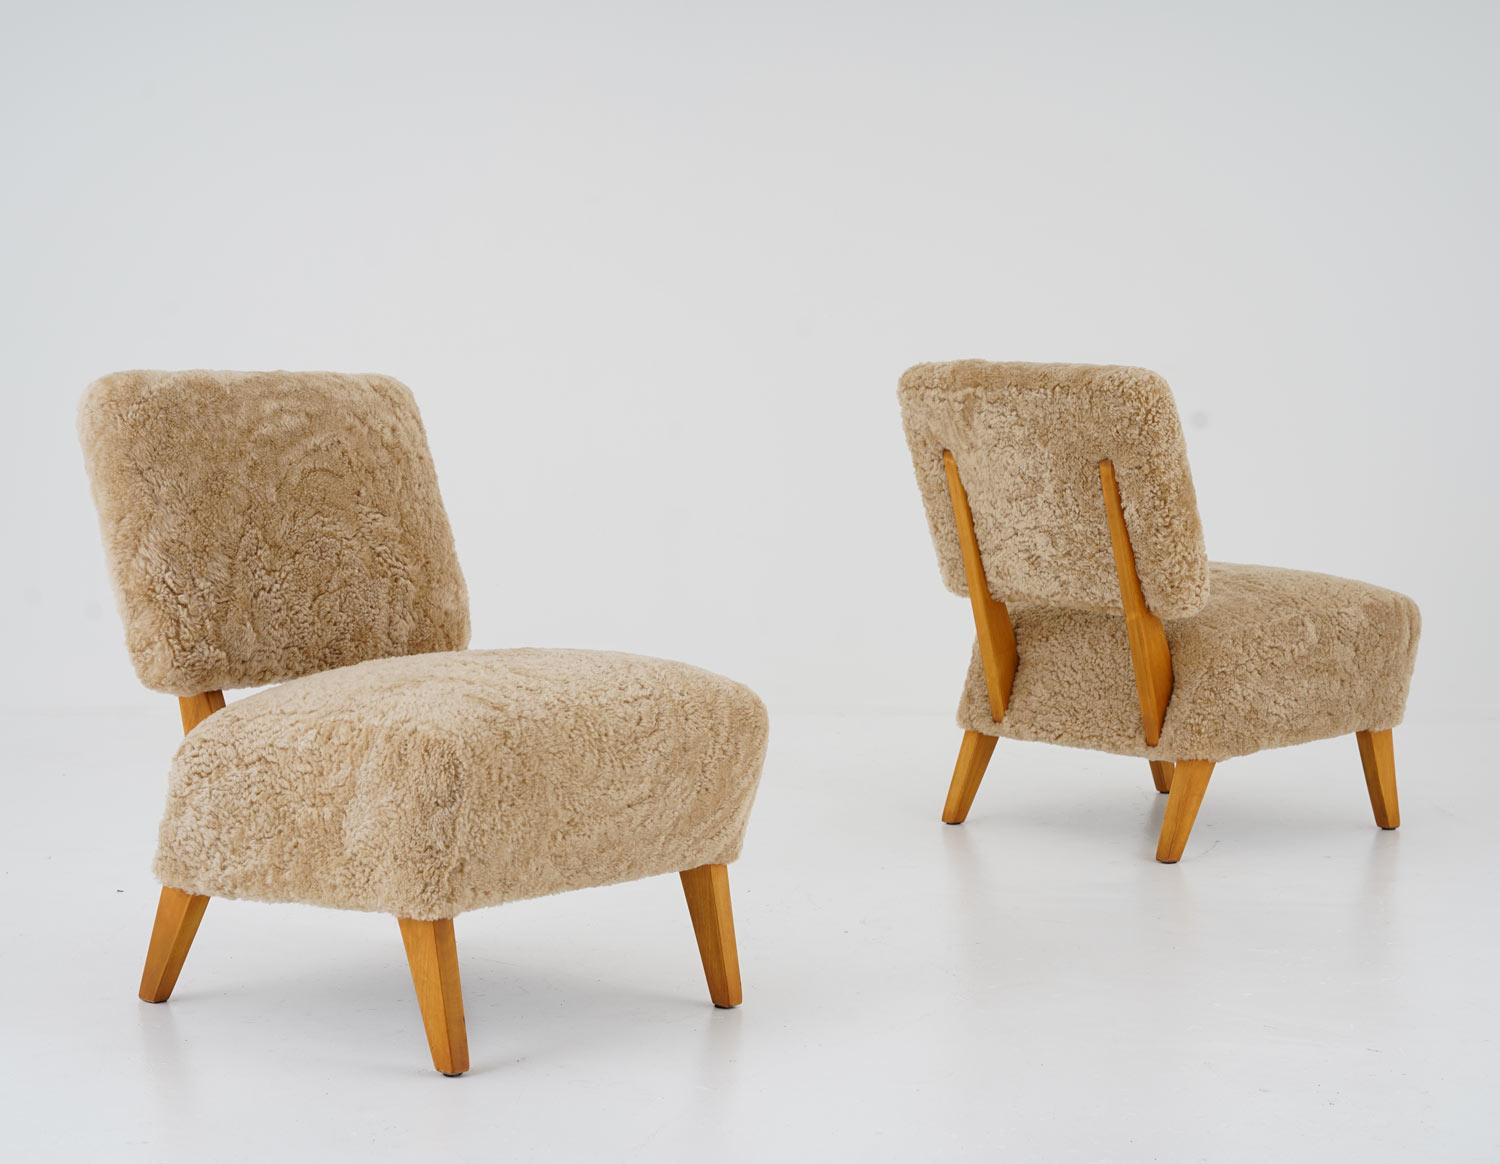 A pair of rare easy chairs manufactured in Norway at Langlos Fabrikker, Stranda, 1940s.
These chairs are a great example of early Norwegian modernist design with beautiful proportions and nice details. 
They have been reupholstered in